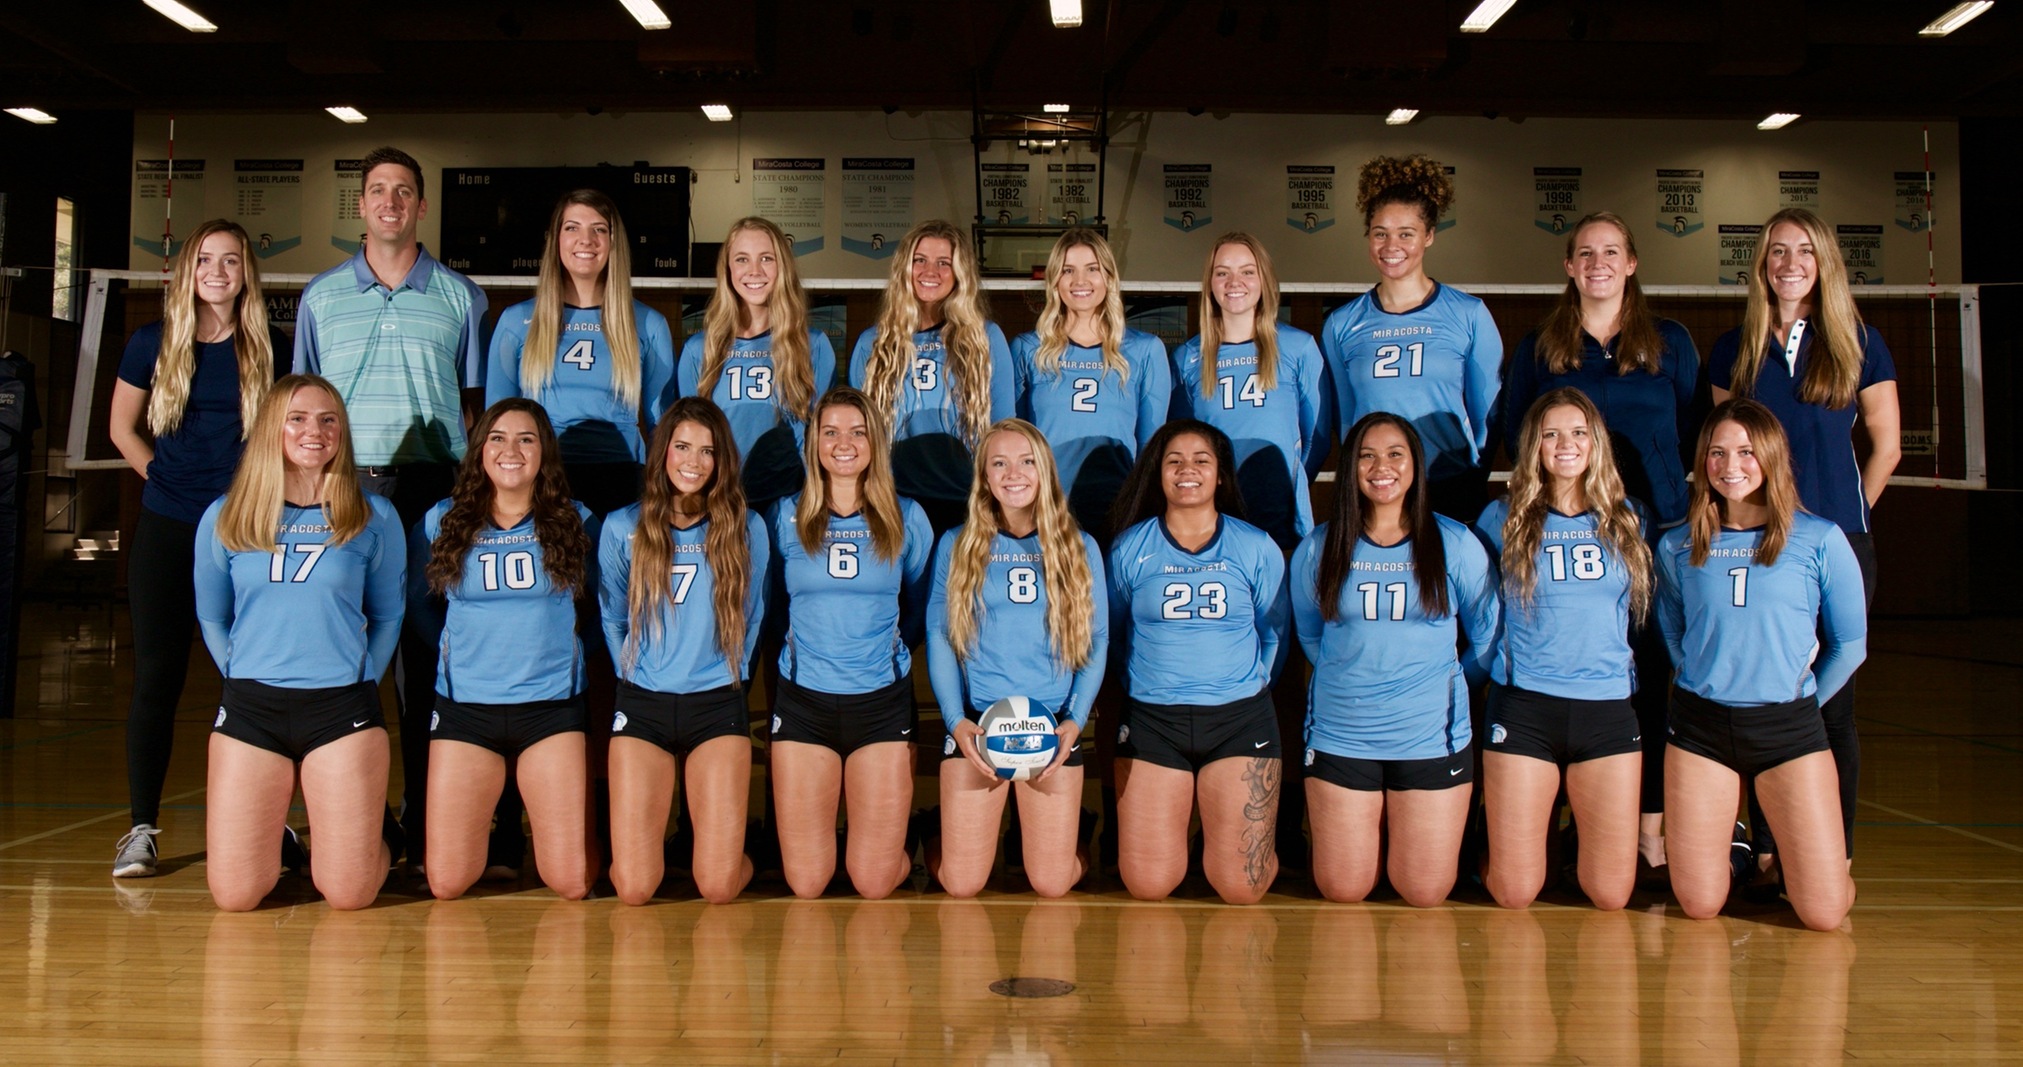 Women's Volleyball team picture.